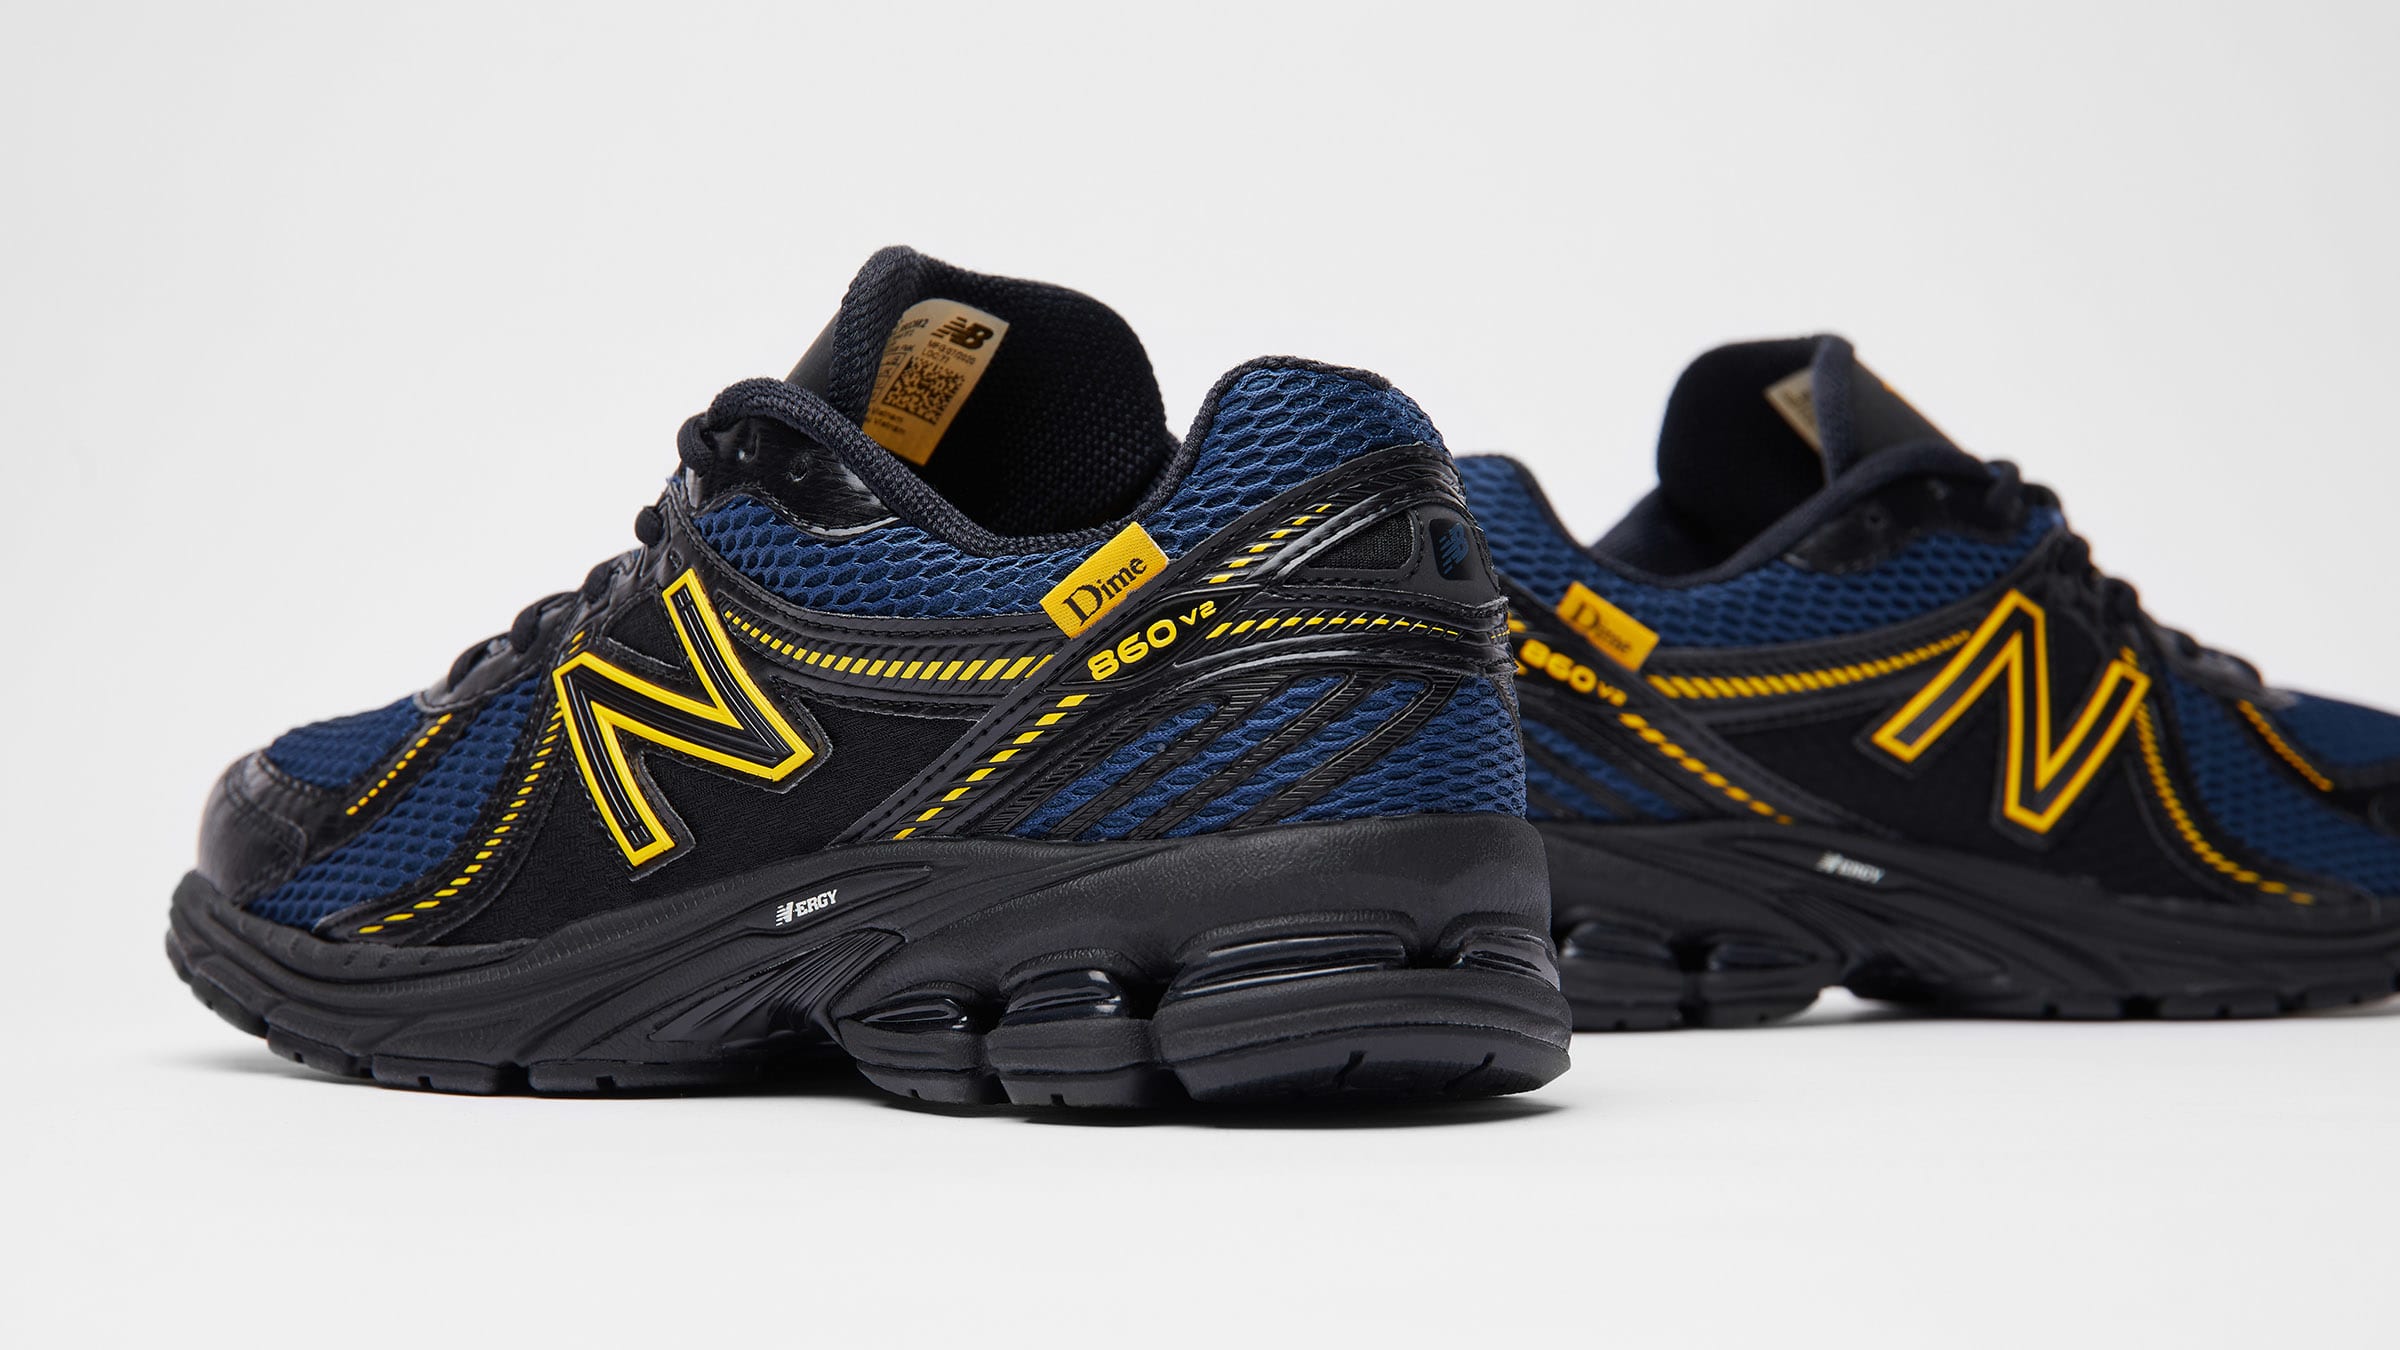 New Balance x Dime 860 v2 (Black, Navy & Yellow) | END. Launches